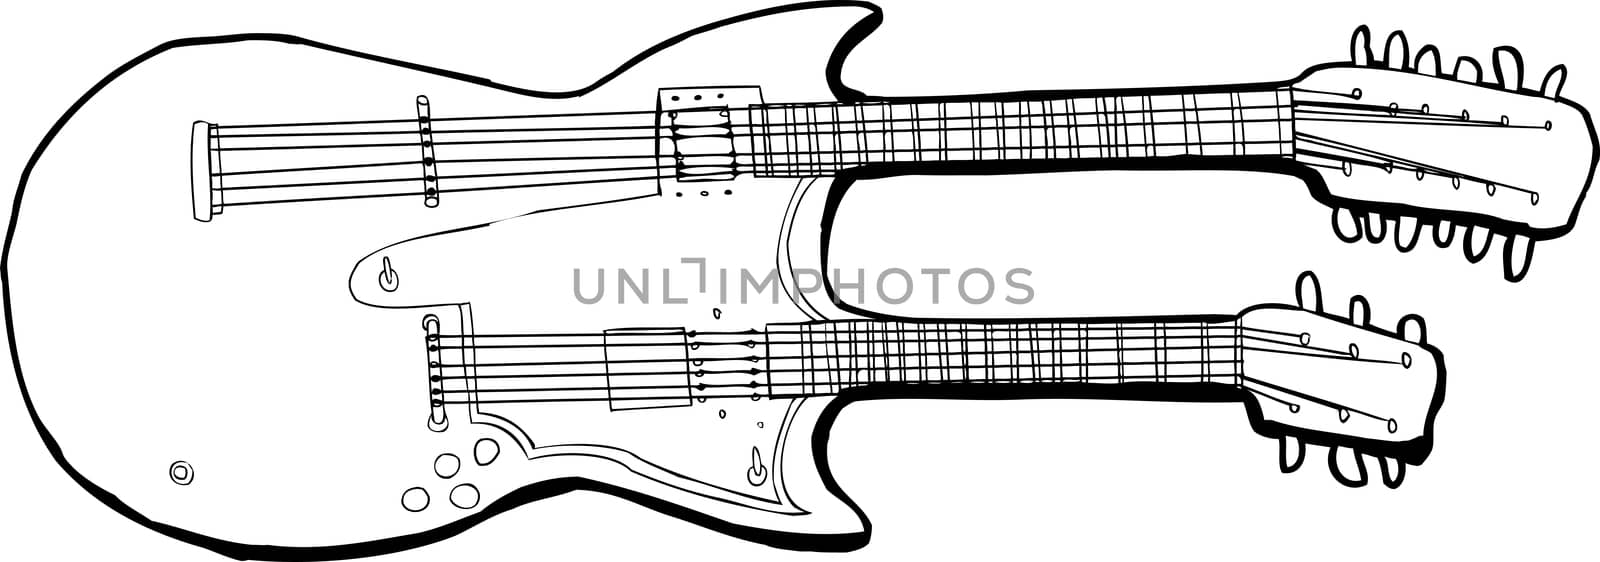 Isolated outline of a unique electric guitar over white